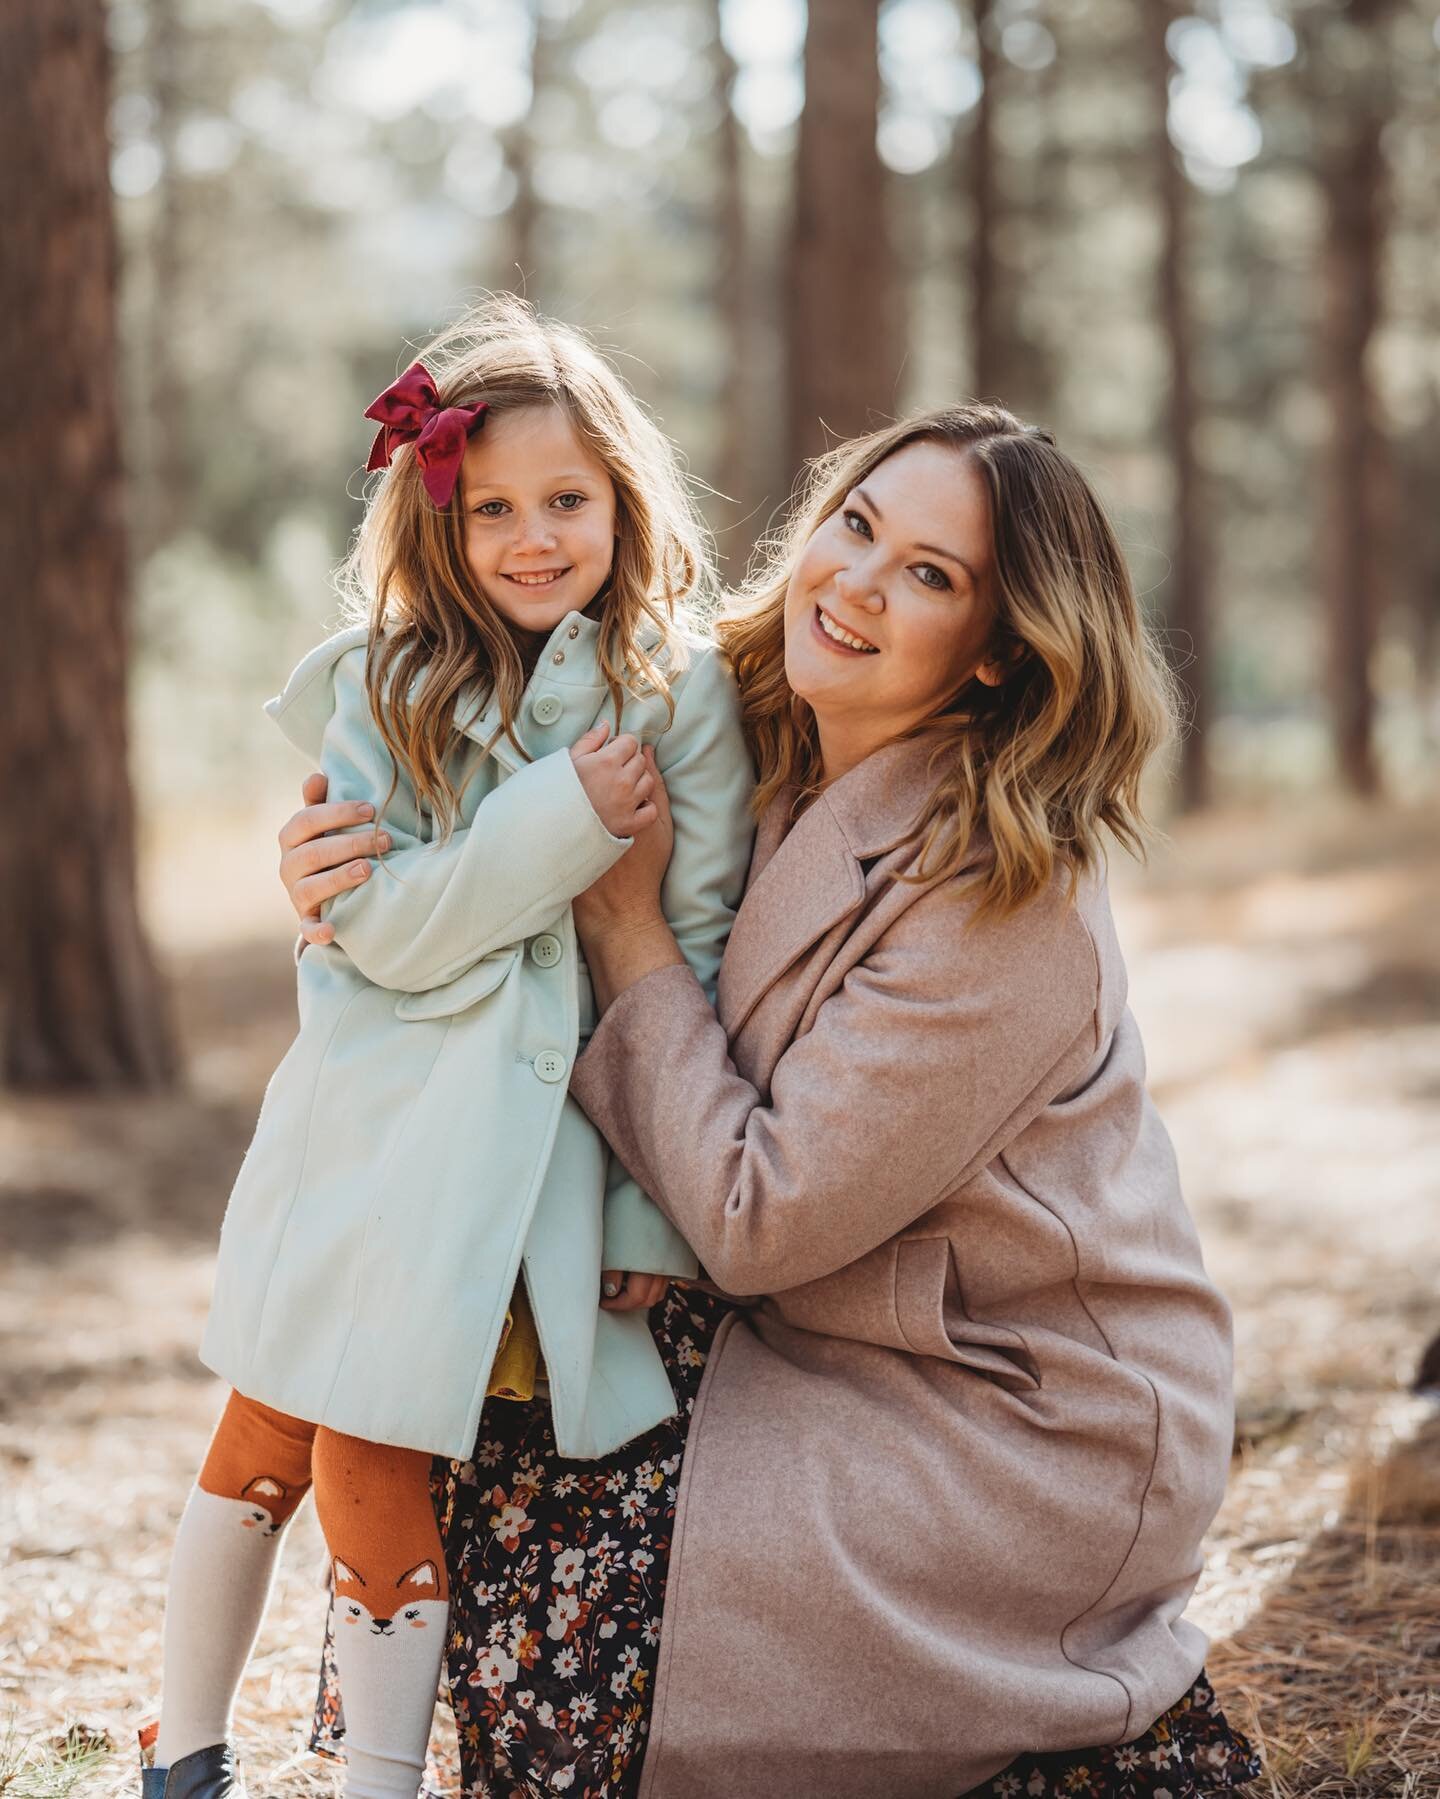 Can I show you something?

I just had to highlight some extra sweet moments from this family session.

&bull;This cutie and her momma. 
&bull;Her love for nature. 
&bull;Their pretty peacoats!
&bull;The fox tights!! 😱🦊🧡

One of my favorite things 